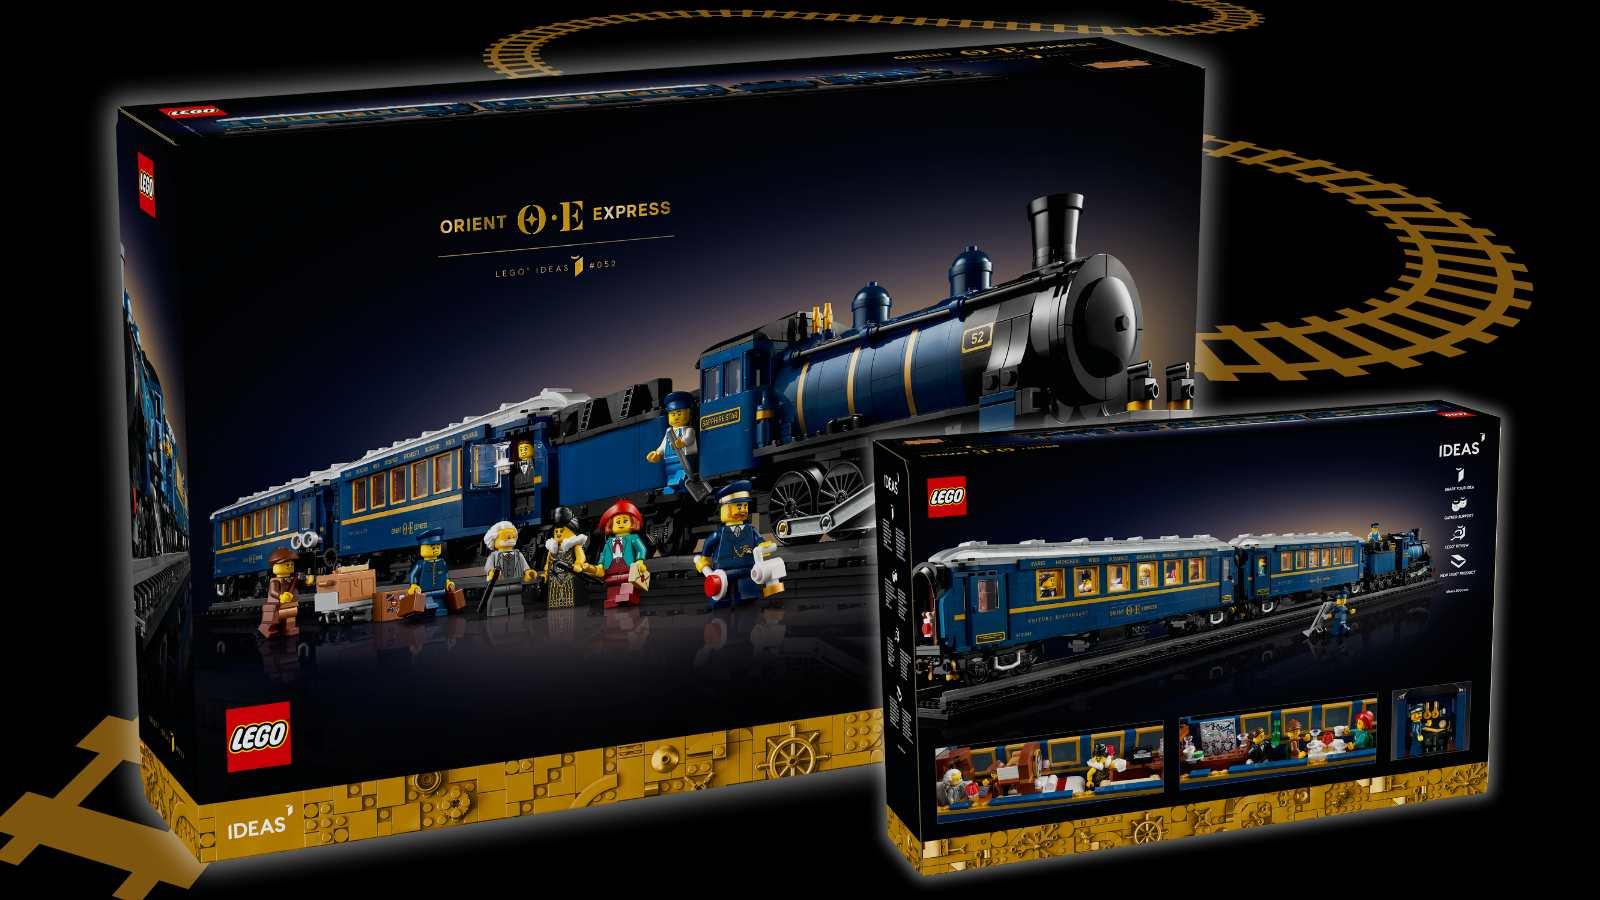 LEGO Ideas The Orient Express set box on a black background with a train-track graphic.